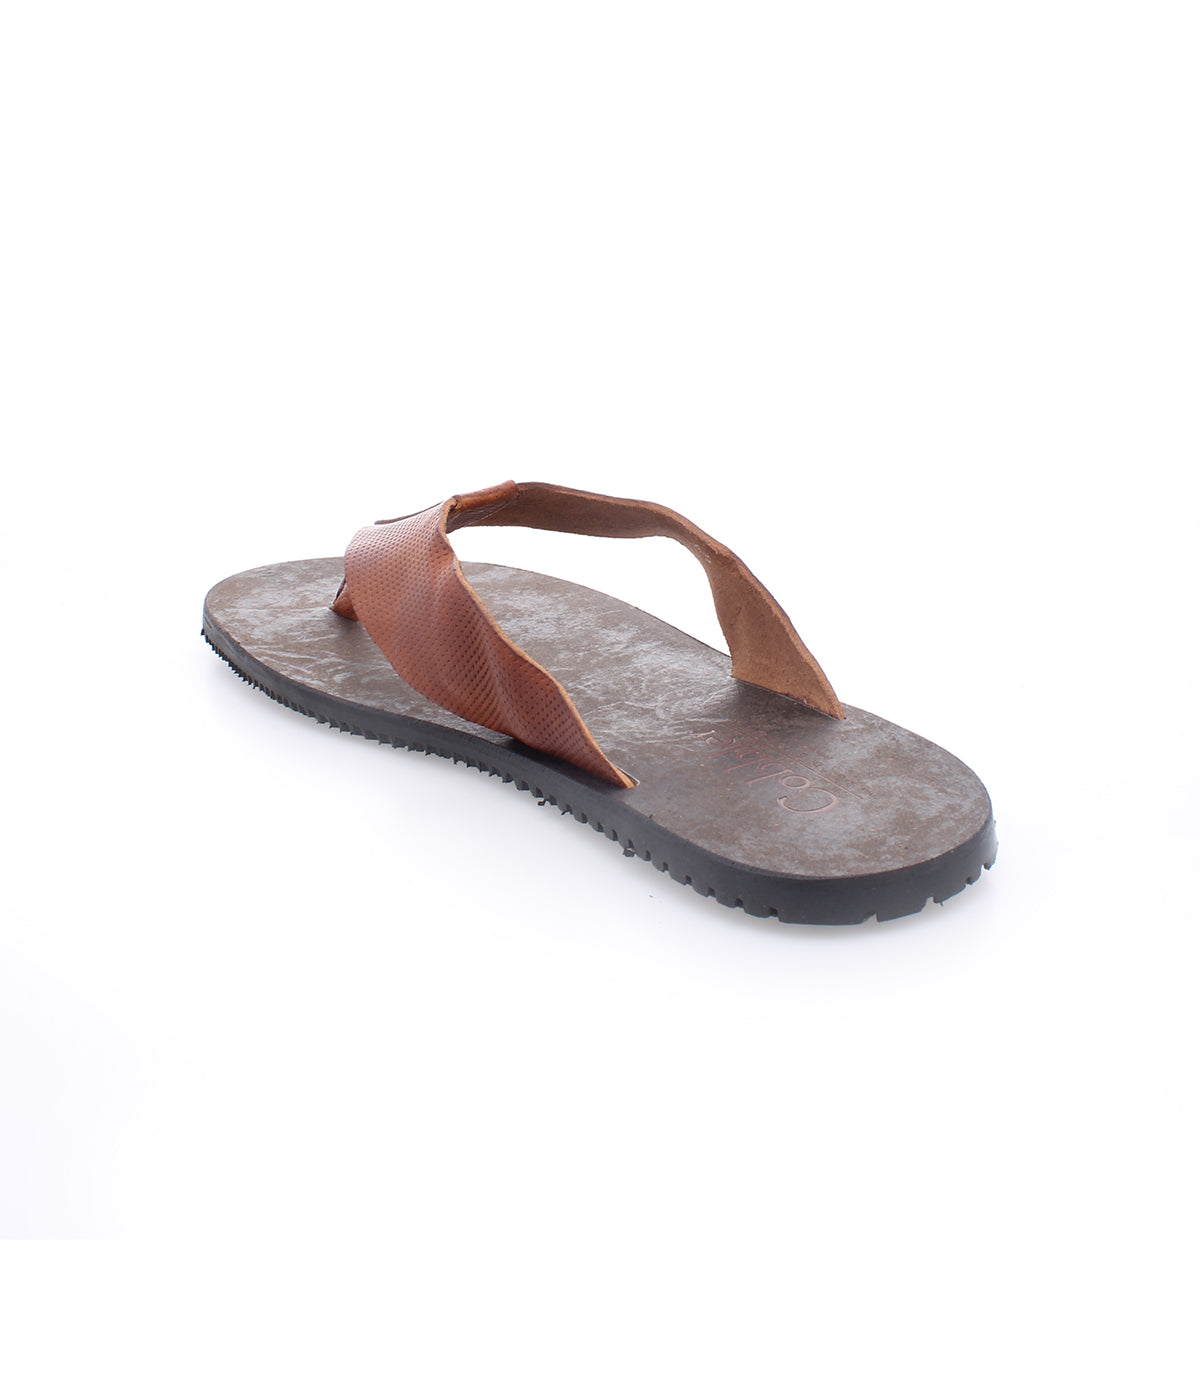 A pair of durable Bed Stu brown leather flip flops on a white background.